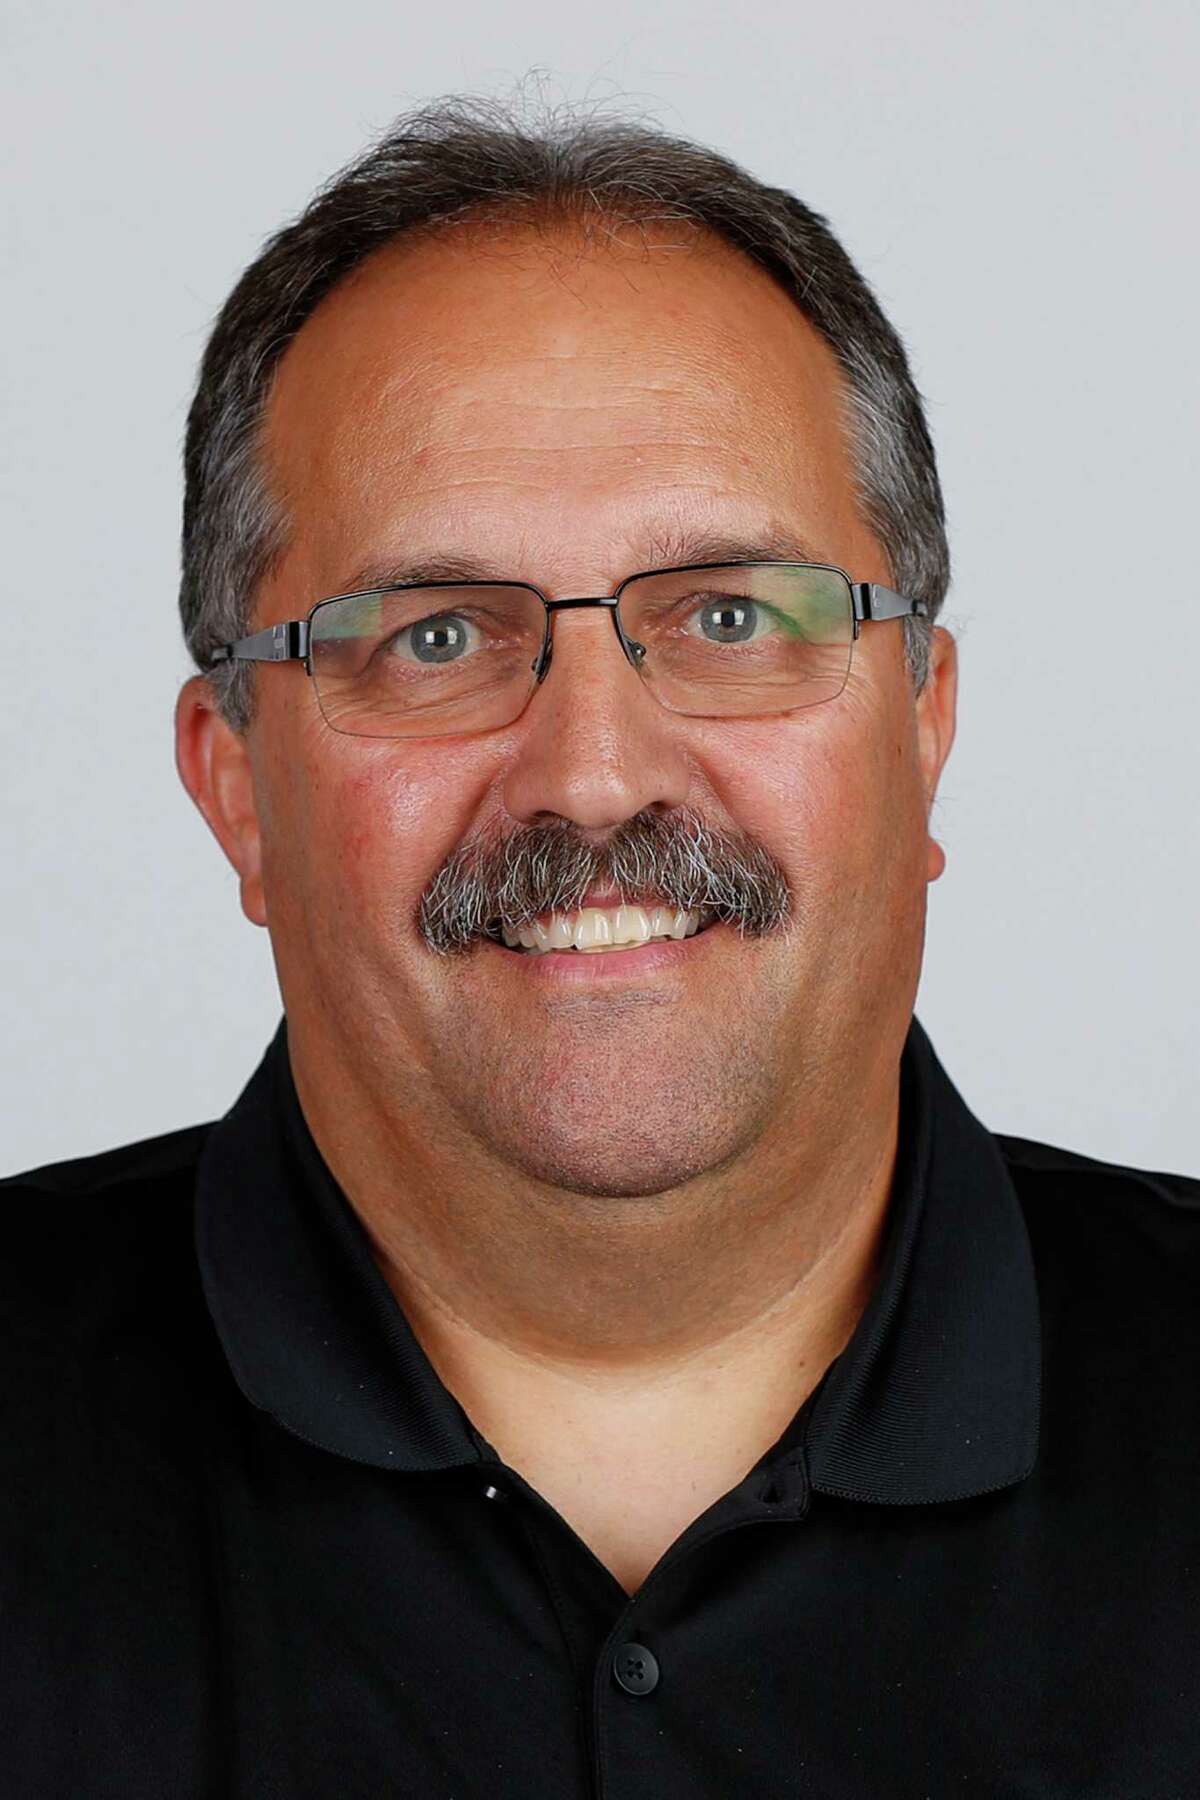 This a headshot of basketball head coach Stan Van Gundy. Stan Van Gundy is an active basketball head coach for the Detroit Pistons as of Monday, Sept. 26, 2016 in the NBA. (AP Photo/Paul Sancya)